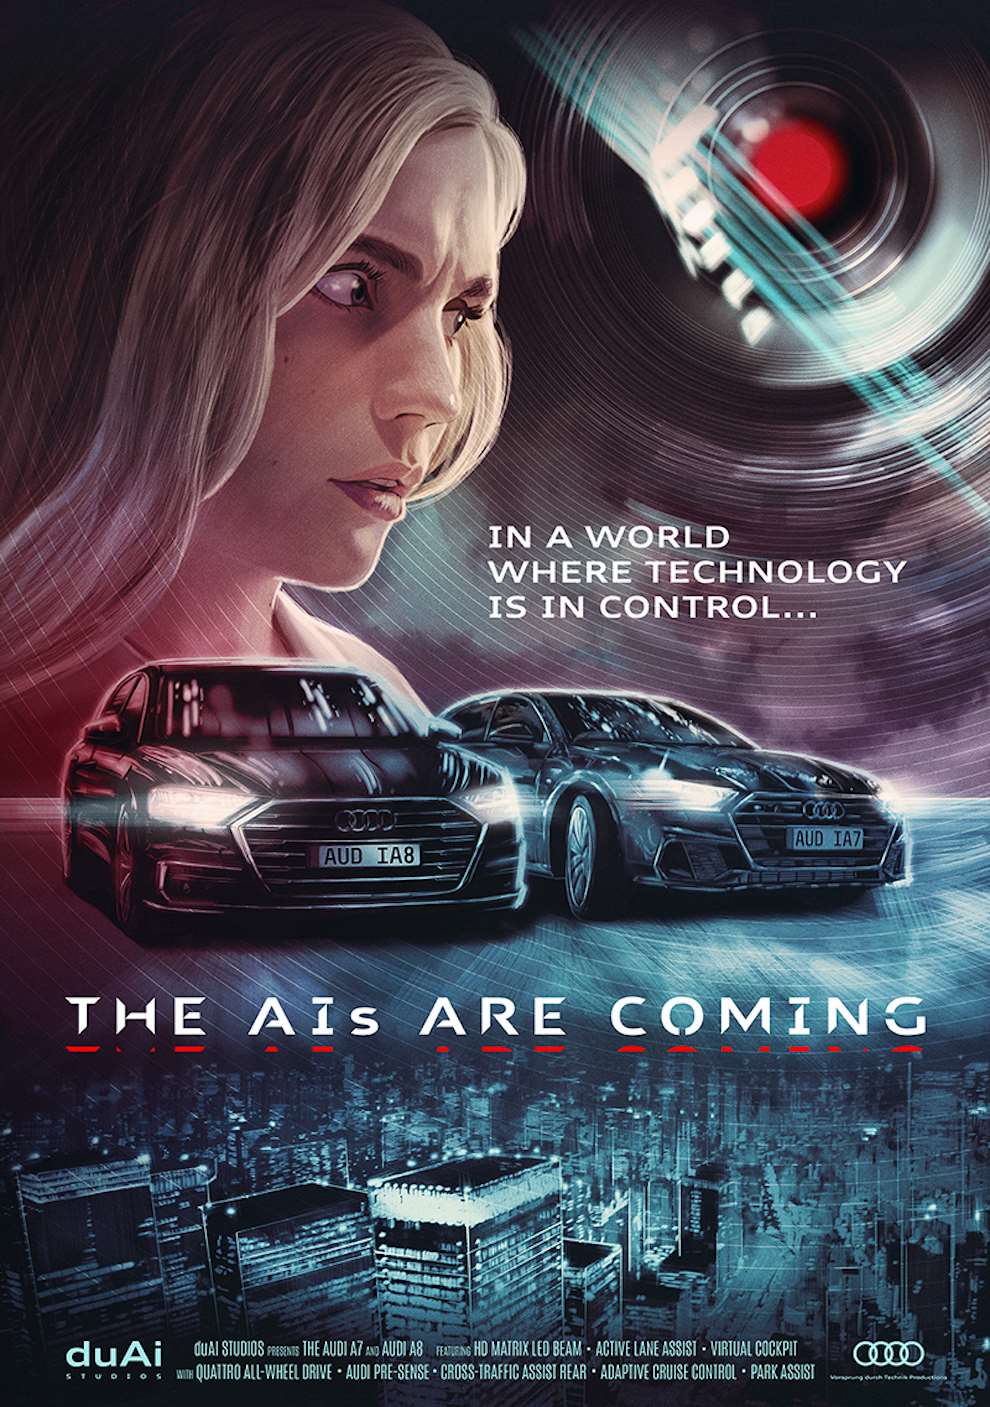 Sam  Gilbey, Cinematic painterly poster art illustration for Audi Cars.